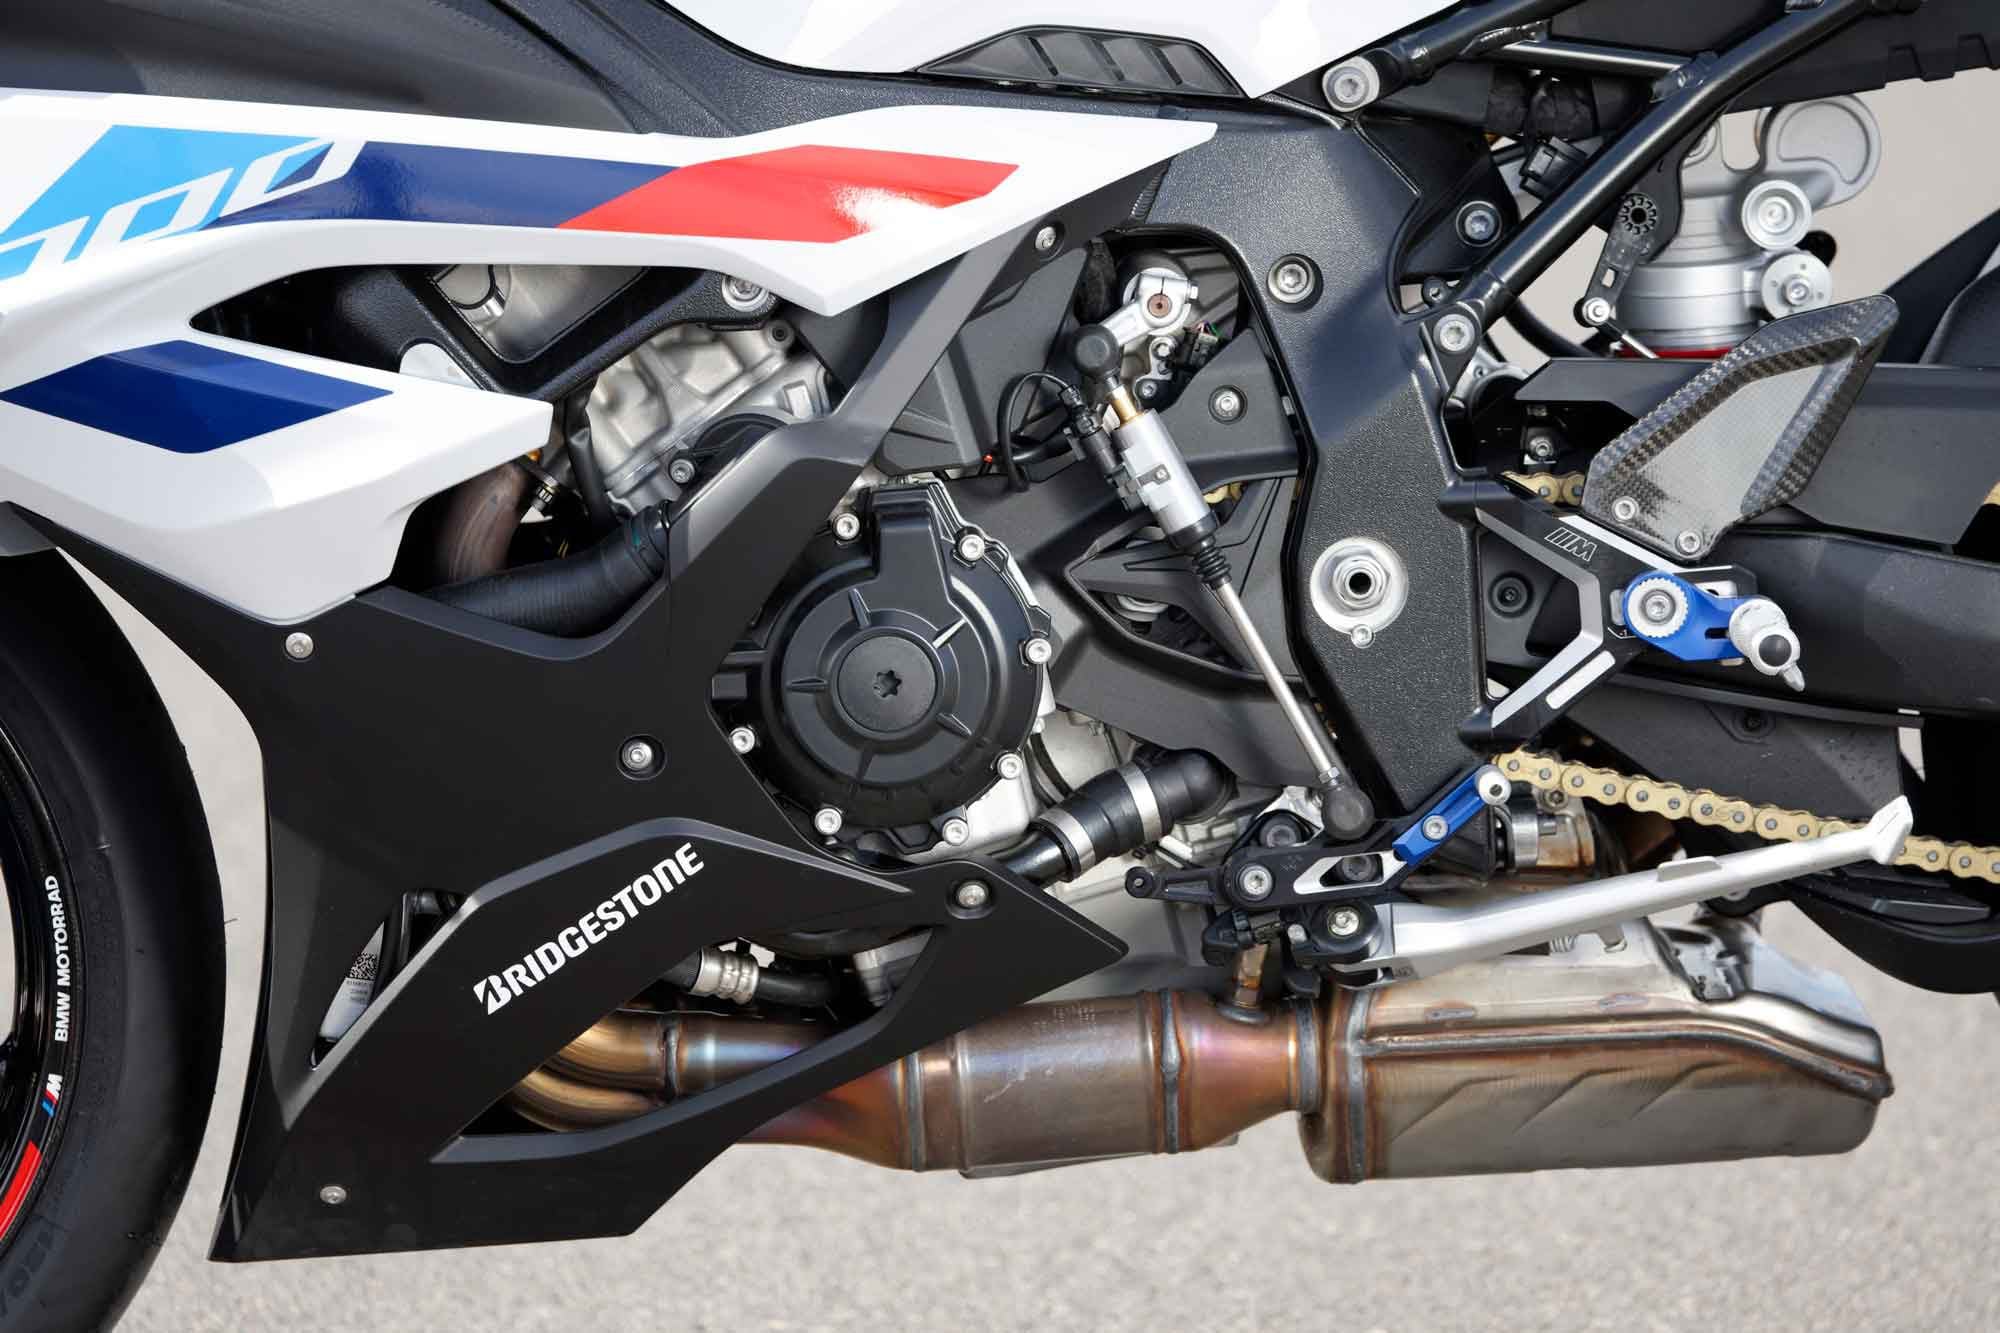 The Shift Assistant Pro quickshifter, which works on both up and down changes, is standard and can easily be reversed into a race pattern, with first gear up and the rest down.